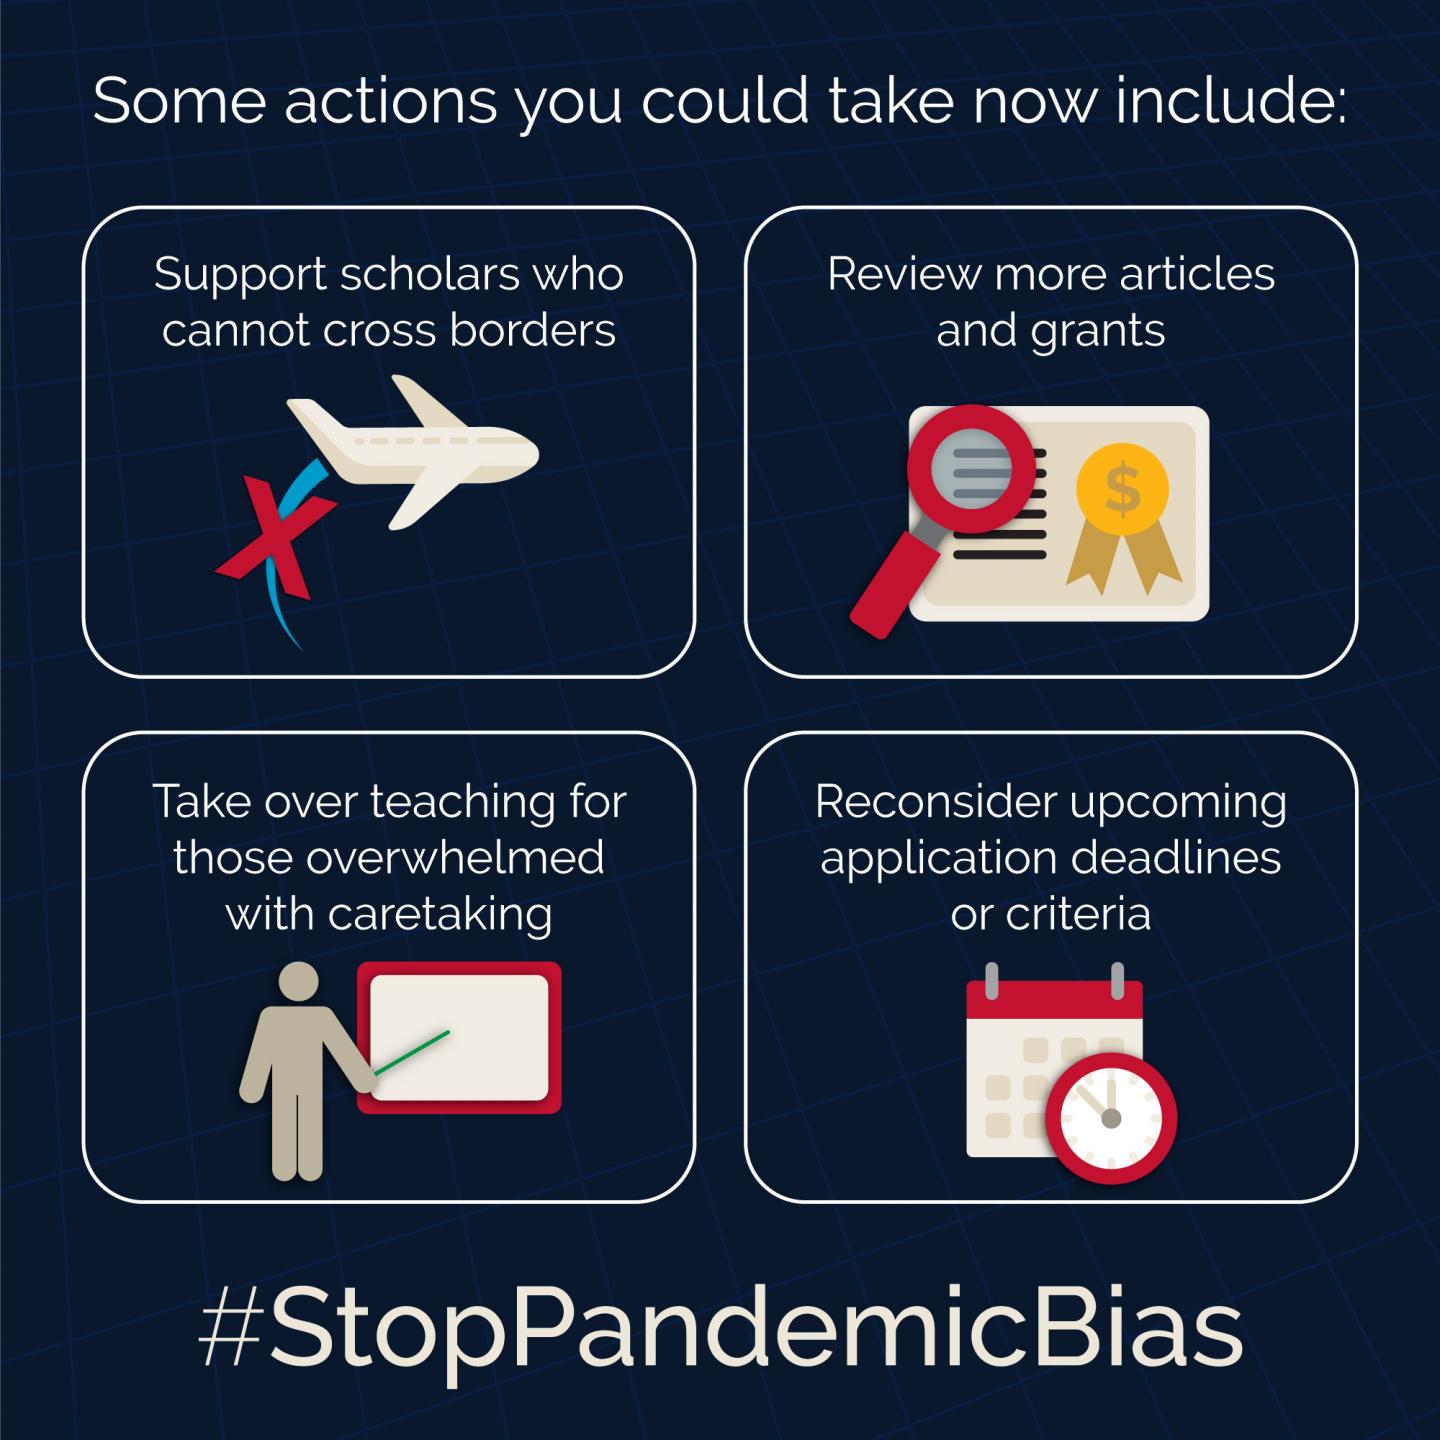 Actions to #StopPandemicBias